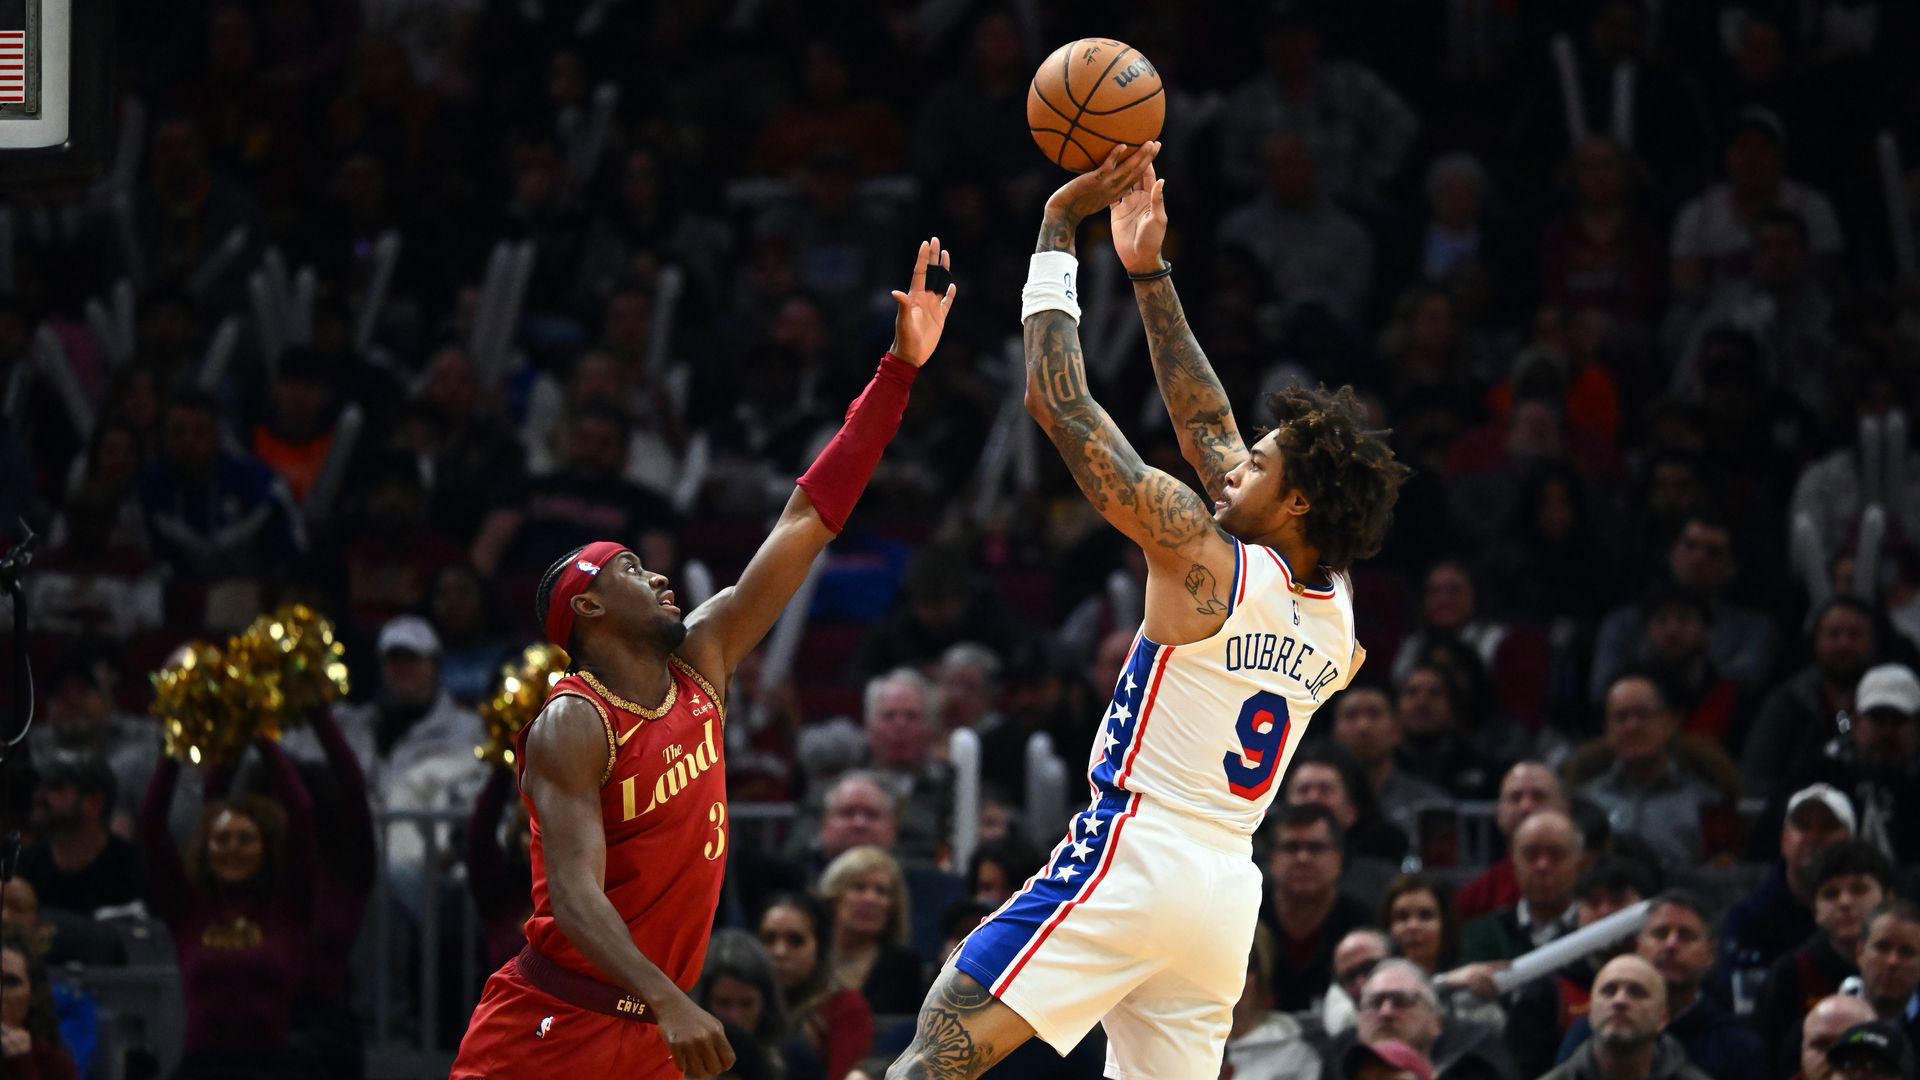 Sixers Bell Ringer: Well-rounded Sixers’ effort topples scorching hot Cavs